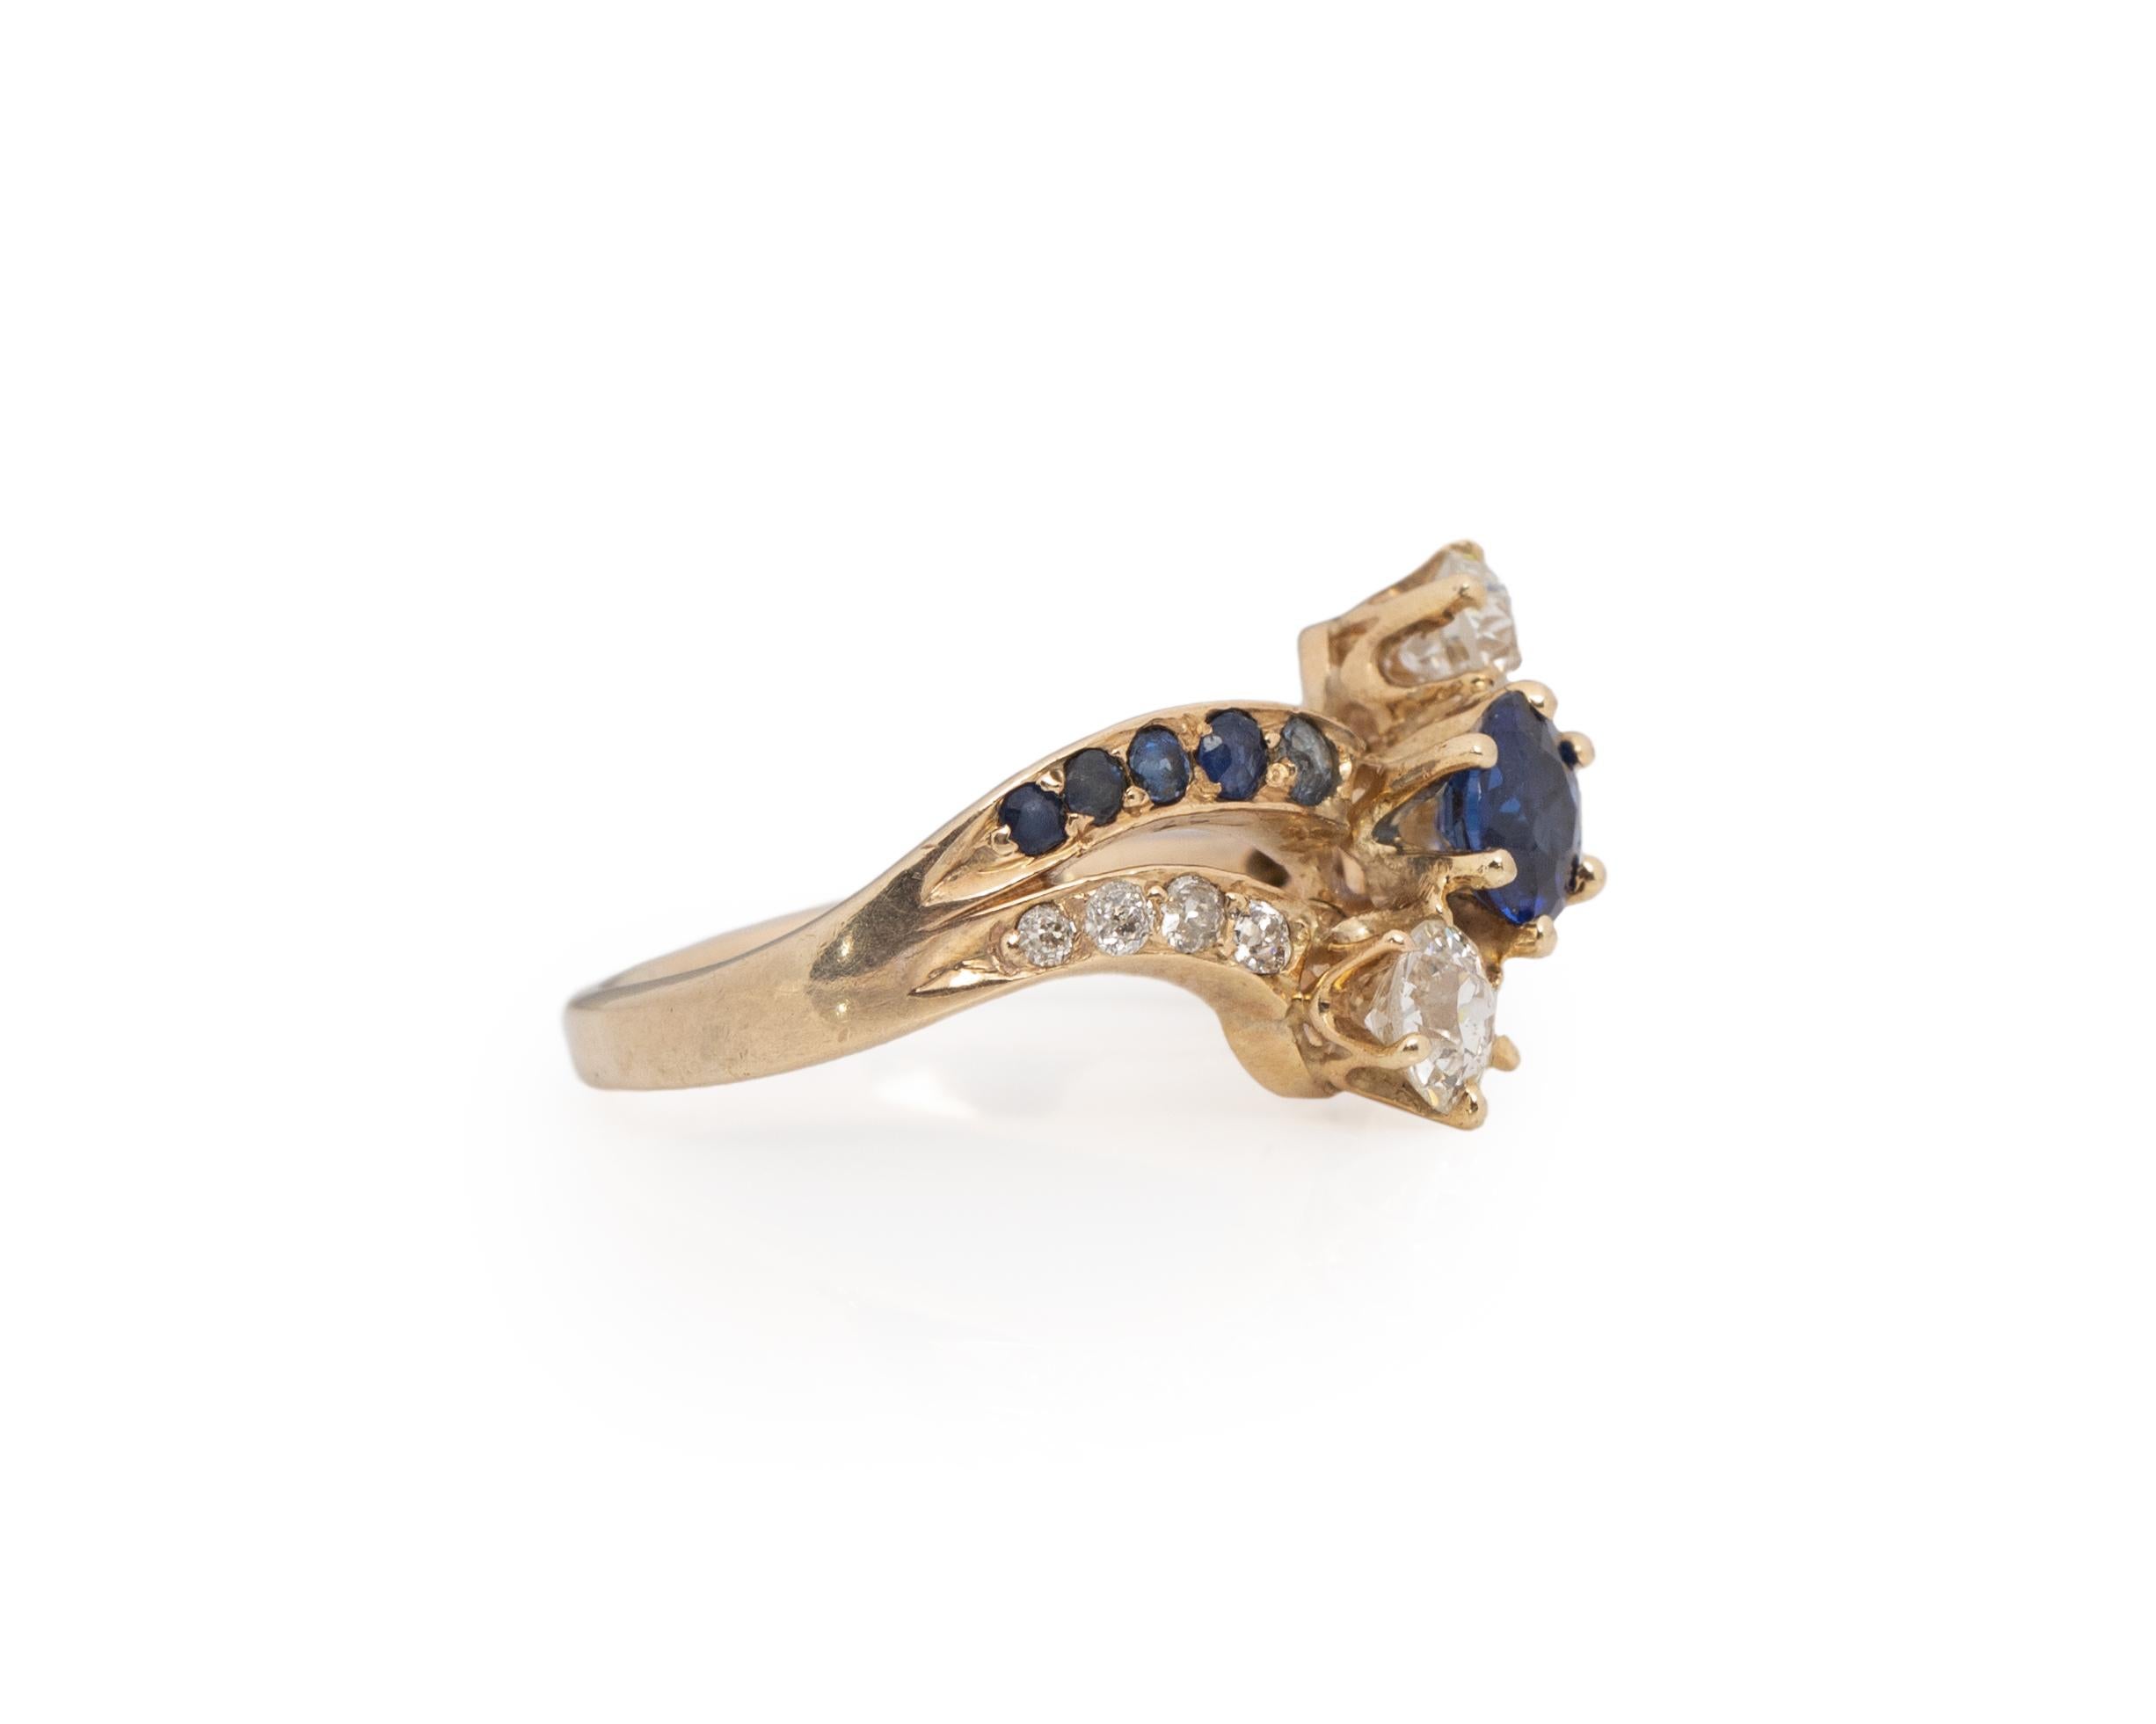 Item Details:
Ring Size: 5.25
Metal Type: 14K Yellow Gold [Hallmarked, and Tested]
Weight: 3.6 grams

Center Sapphire Details:

Type: Natural
Weight: .65ct
Cut: Old European brilliant
Color: Blue

Side Diamond Details:
Weight: .60ct, total